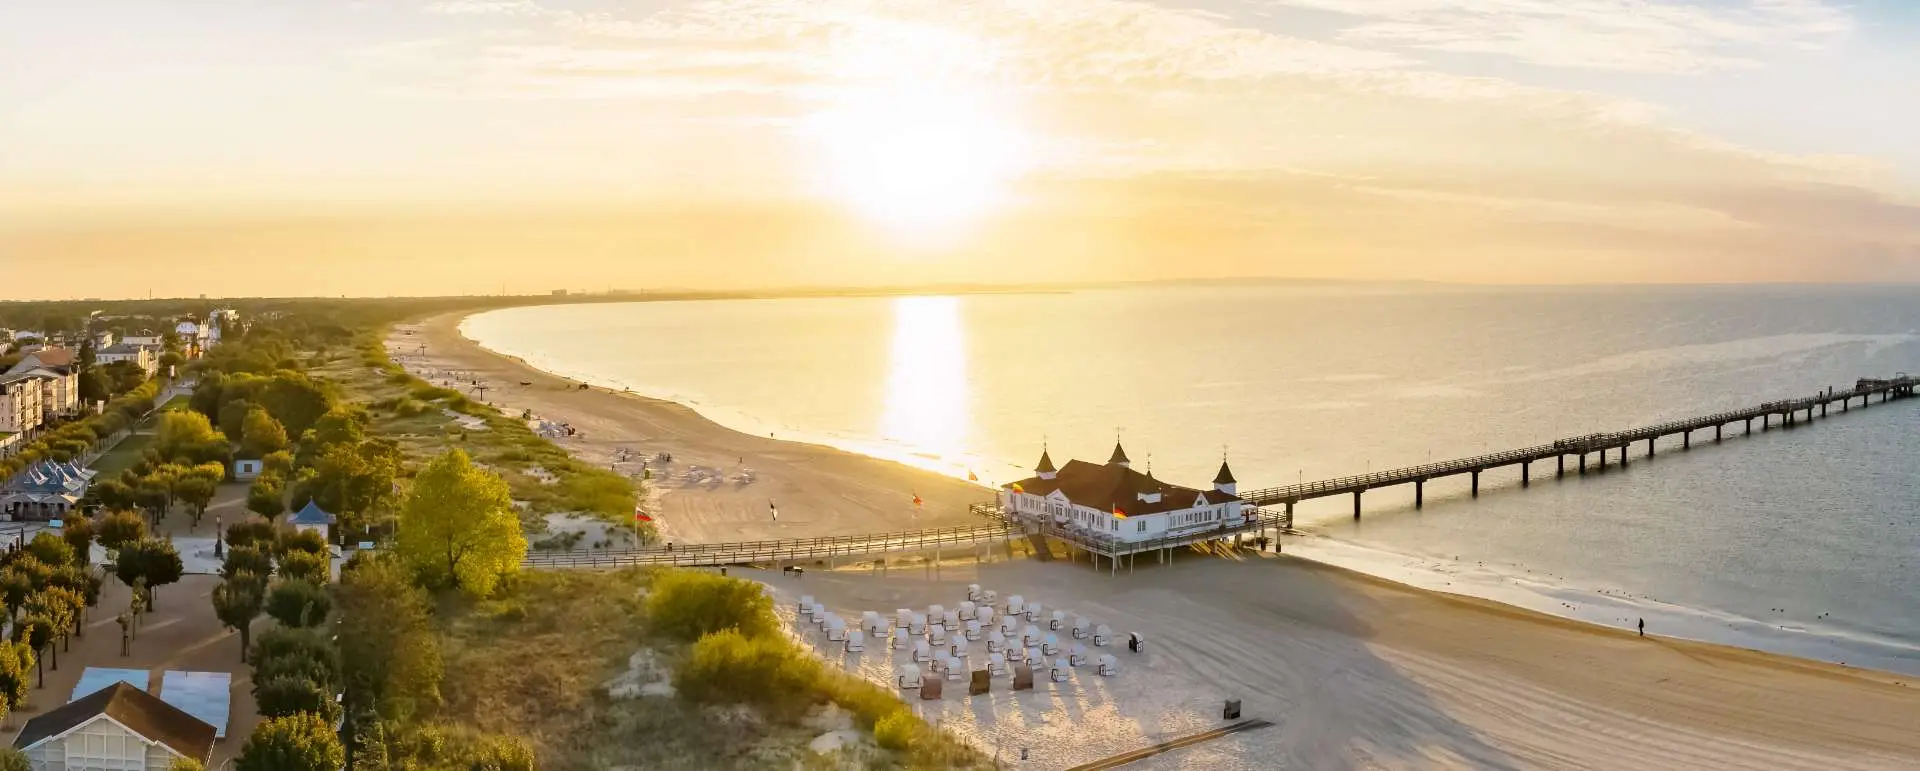 Usedom - the destination for groups